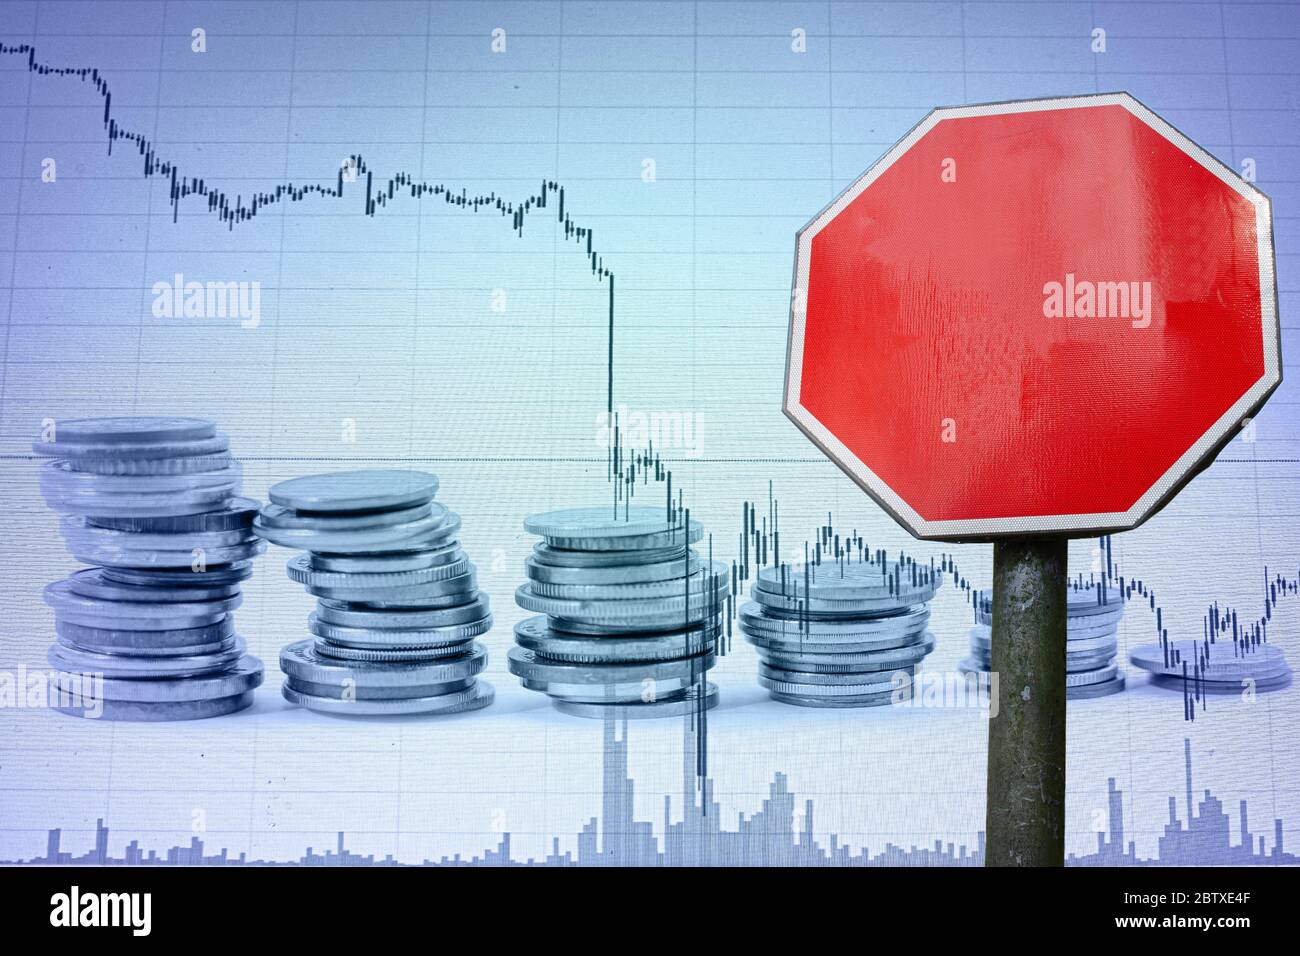 Stop sign with copy space on economy background. Business and finance concept. Template for money, economy concept. Stock Photo